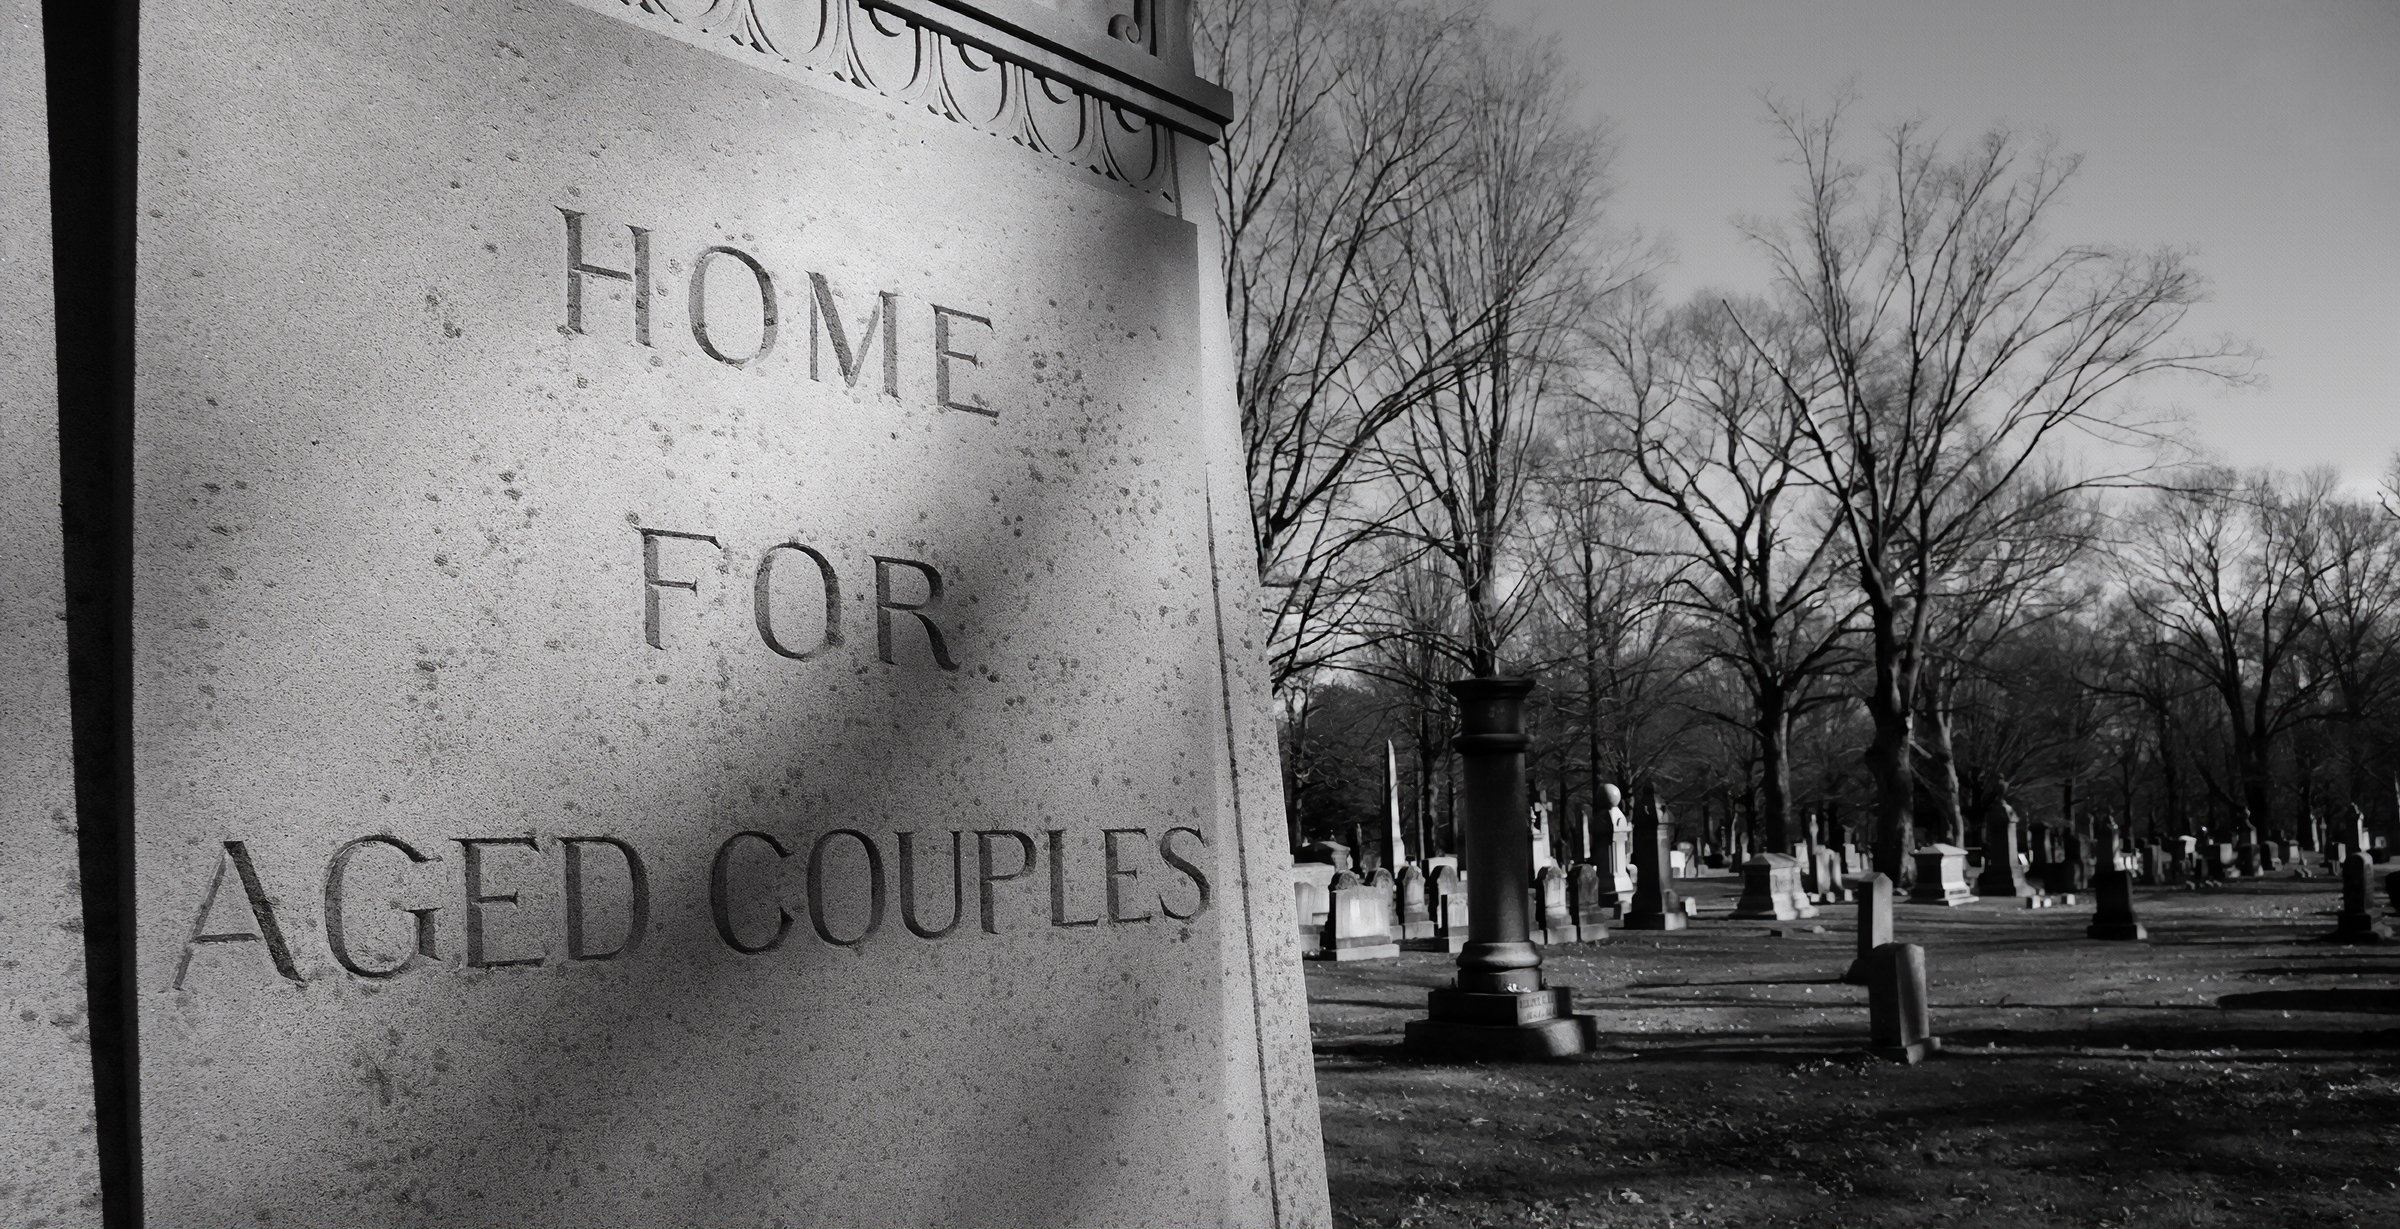 Home for Aged Couples